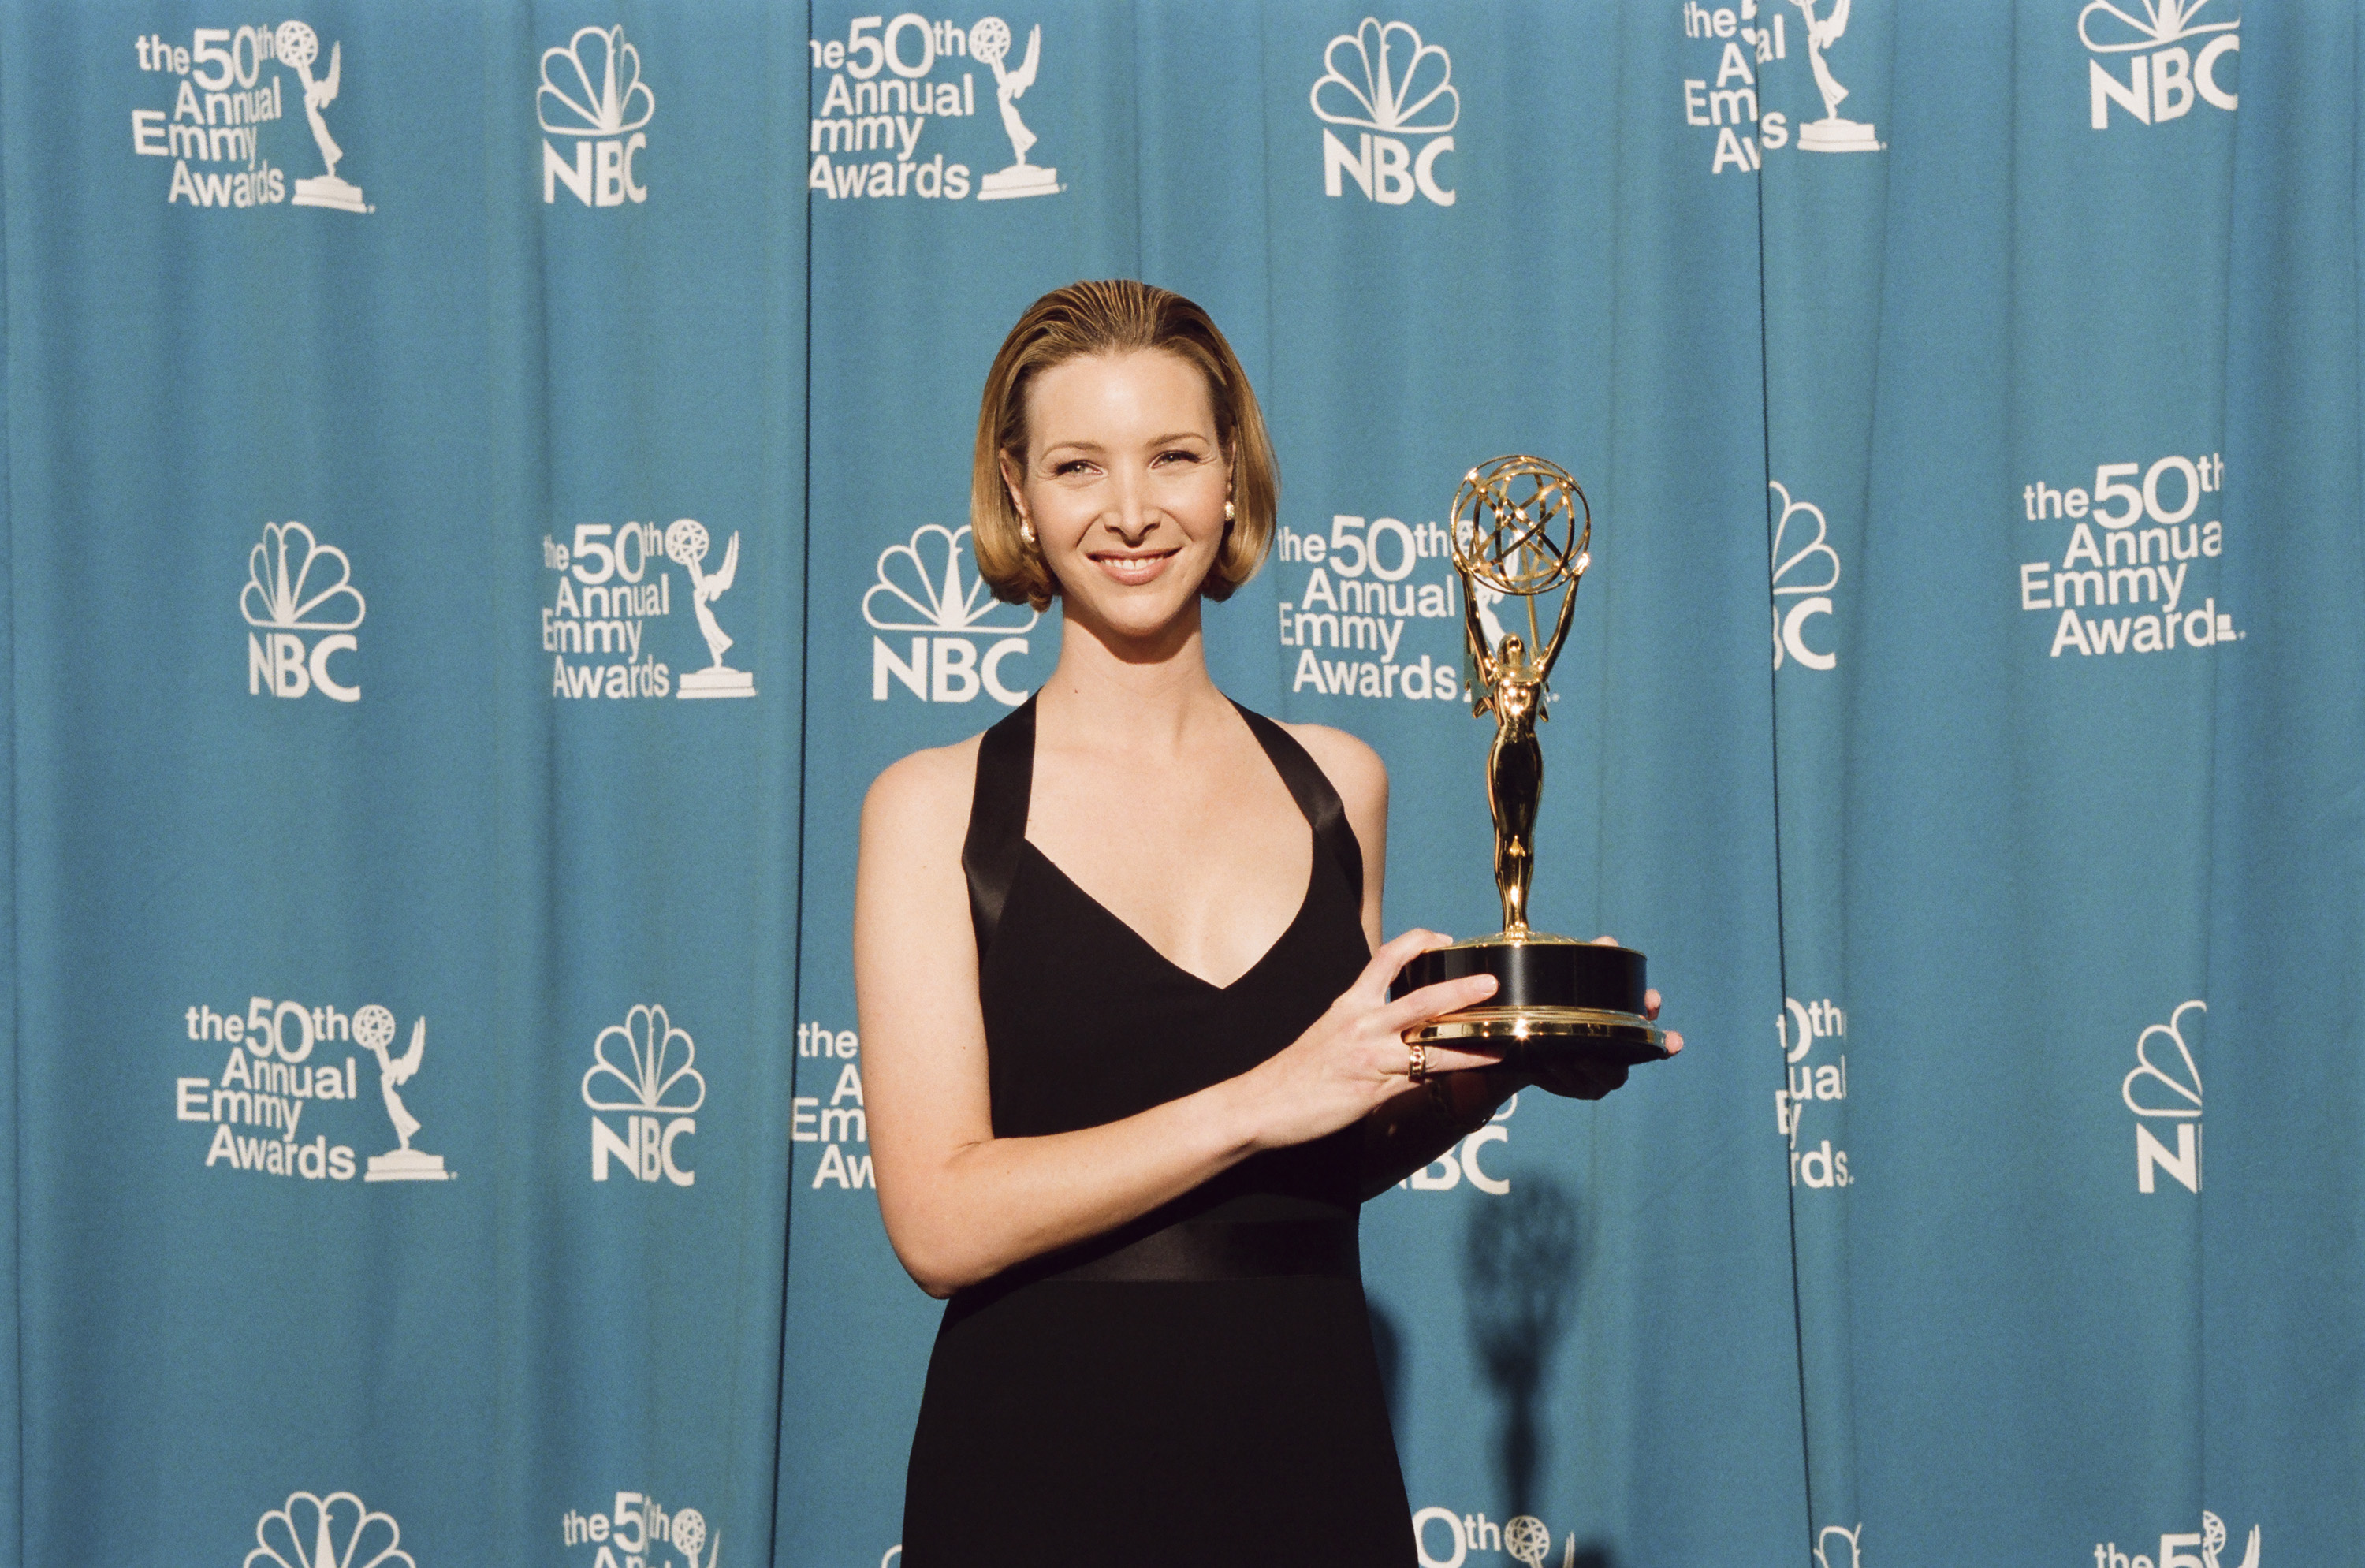 Emmy winner Lisa Kudrow during the 50th Annual Primetime Emmy Awards in Los Angeles, California on September 13, 1998 | Source: Getty Images